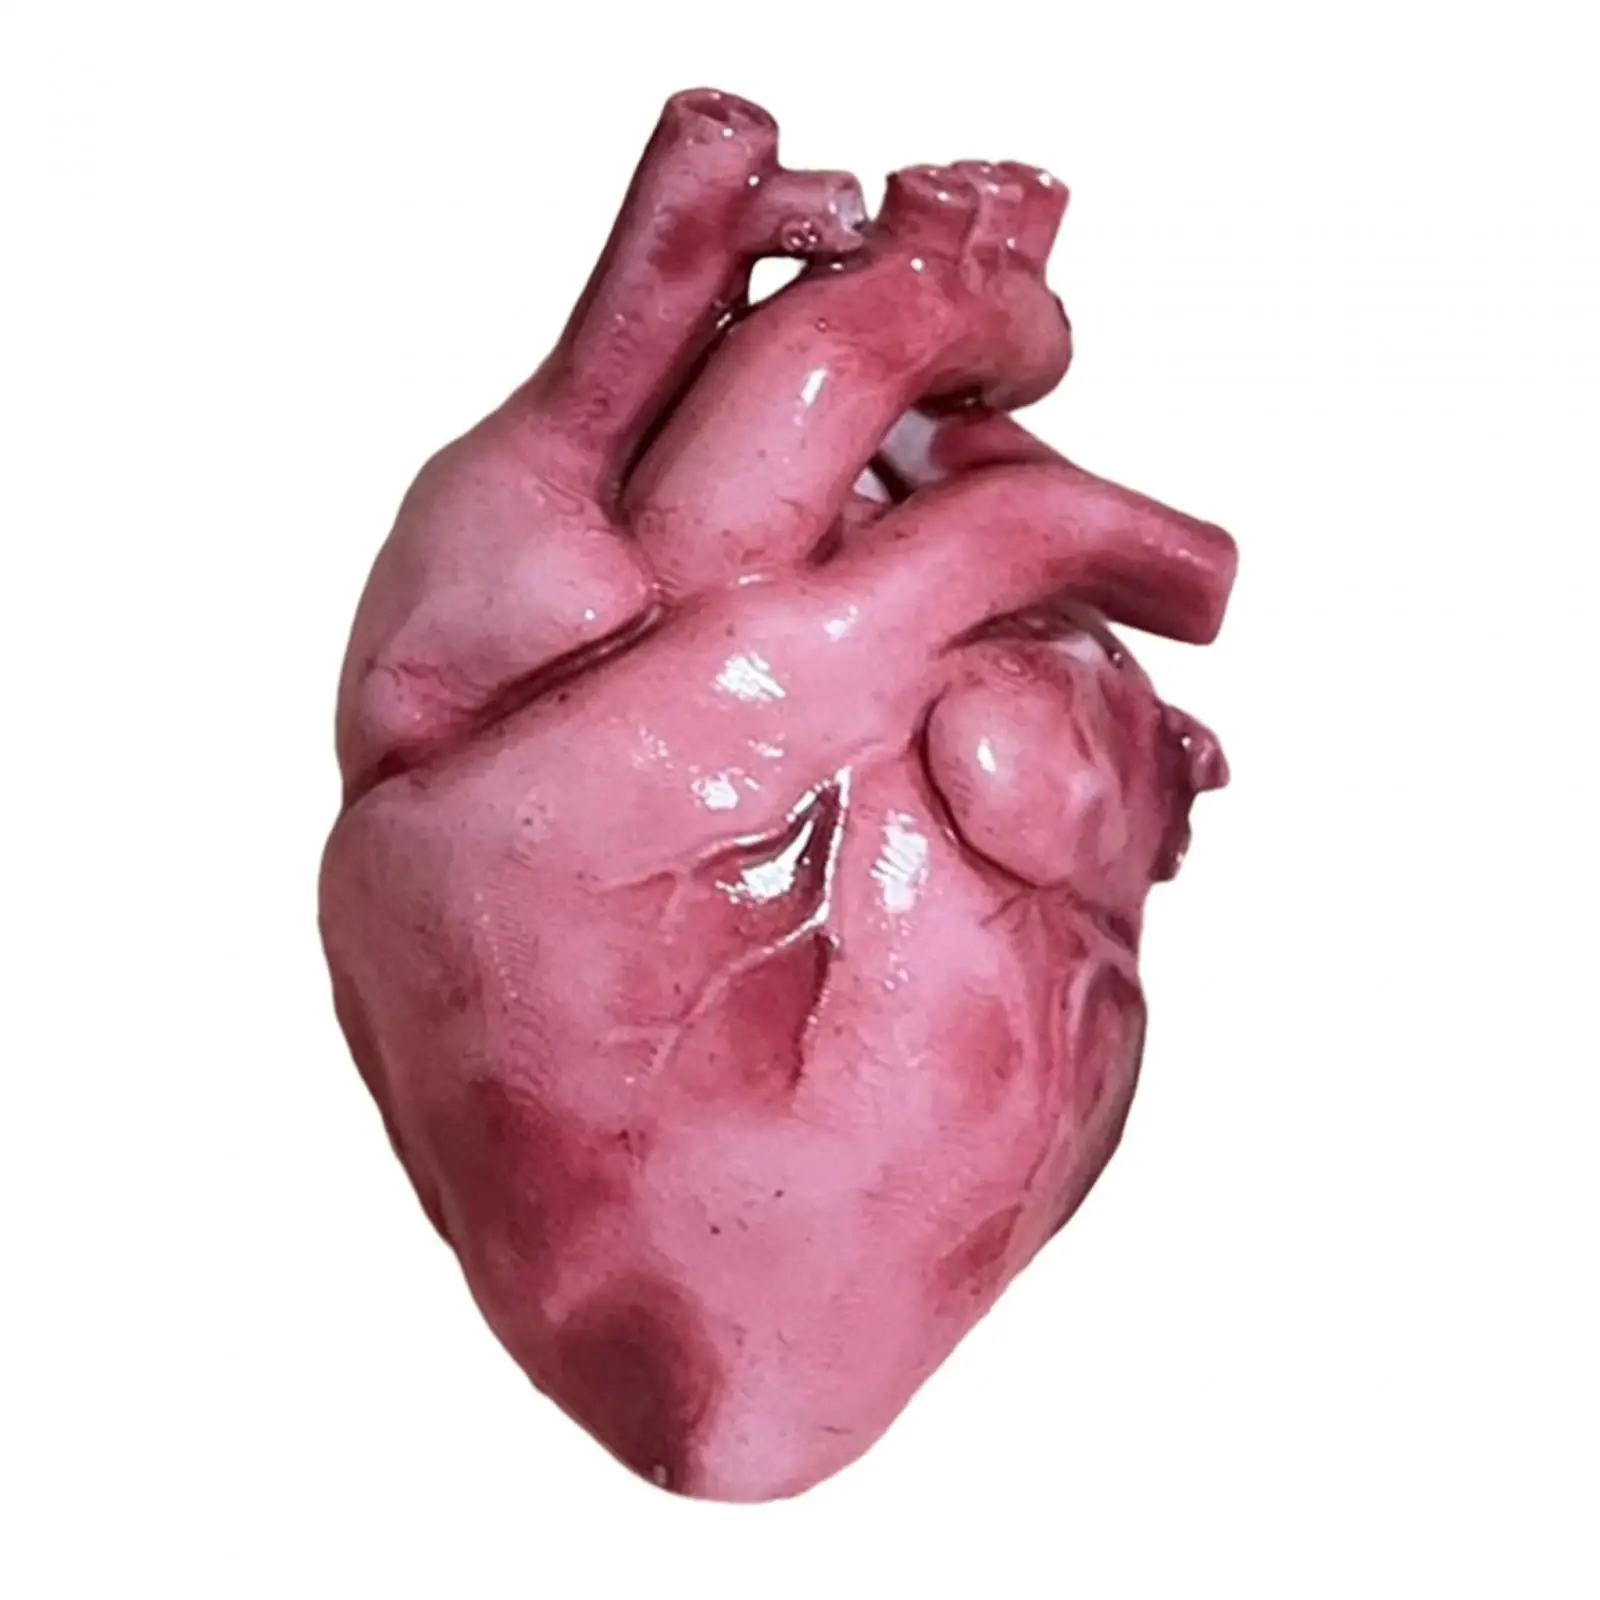 1/18 Heart Model Scene Decor Photography Prop Toy for Kids Adults Diorama